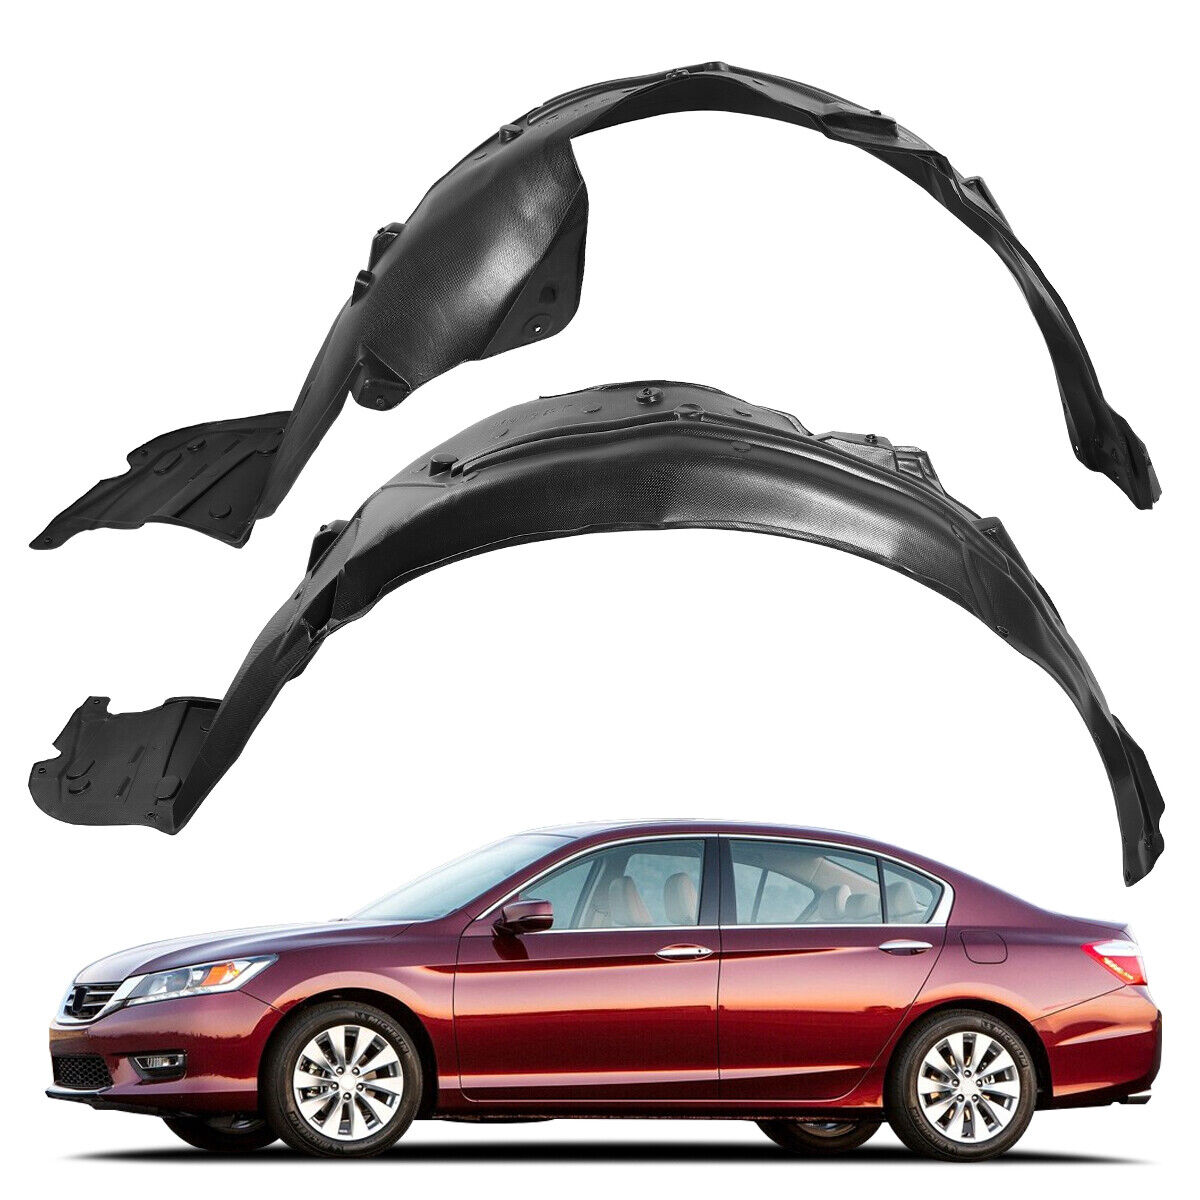 Front Left and Right Fender Liner Set of 2 For 2013-2015 Honda Accord Sedan Pair